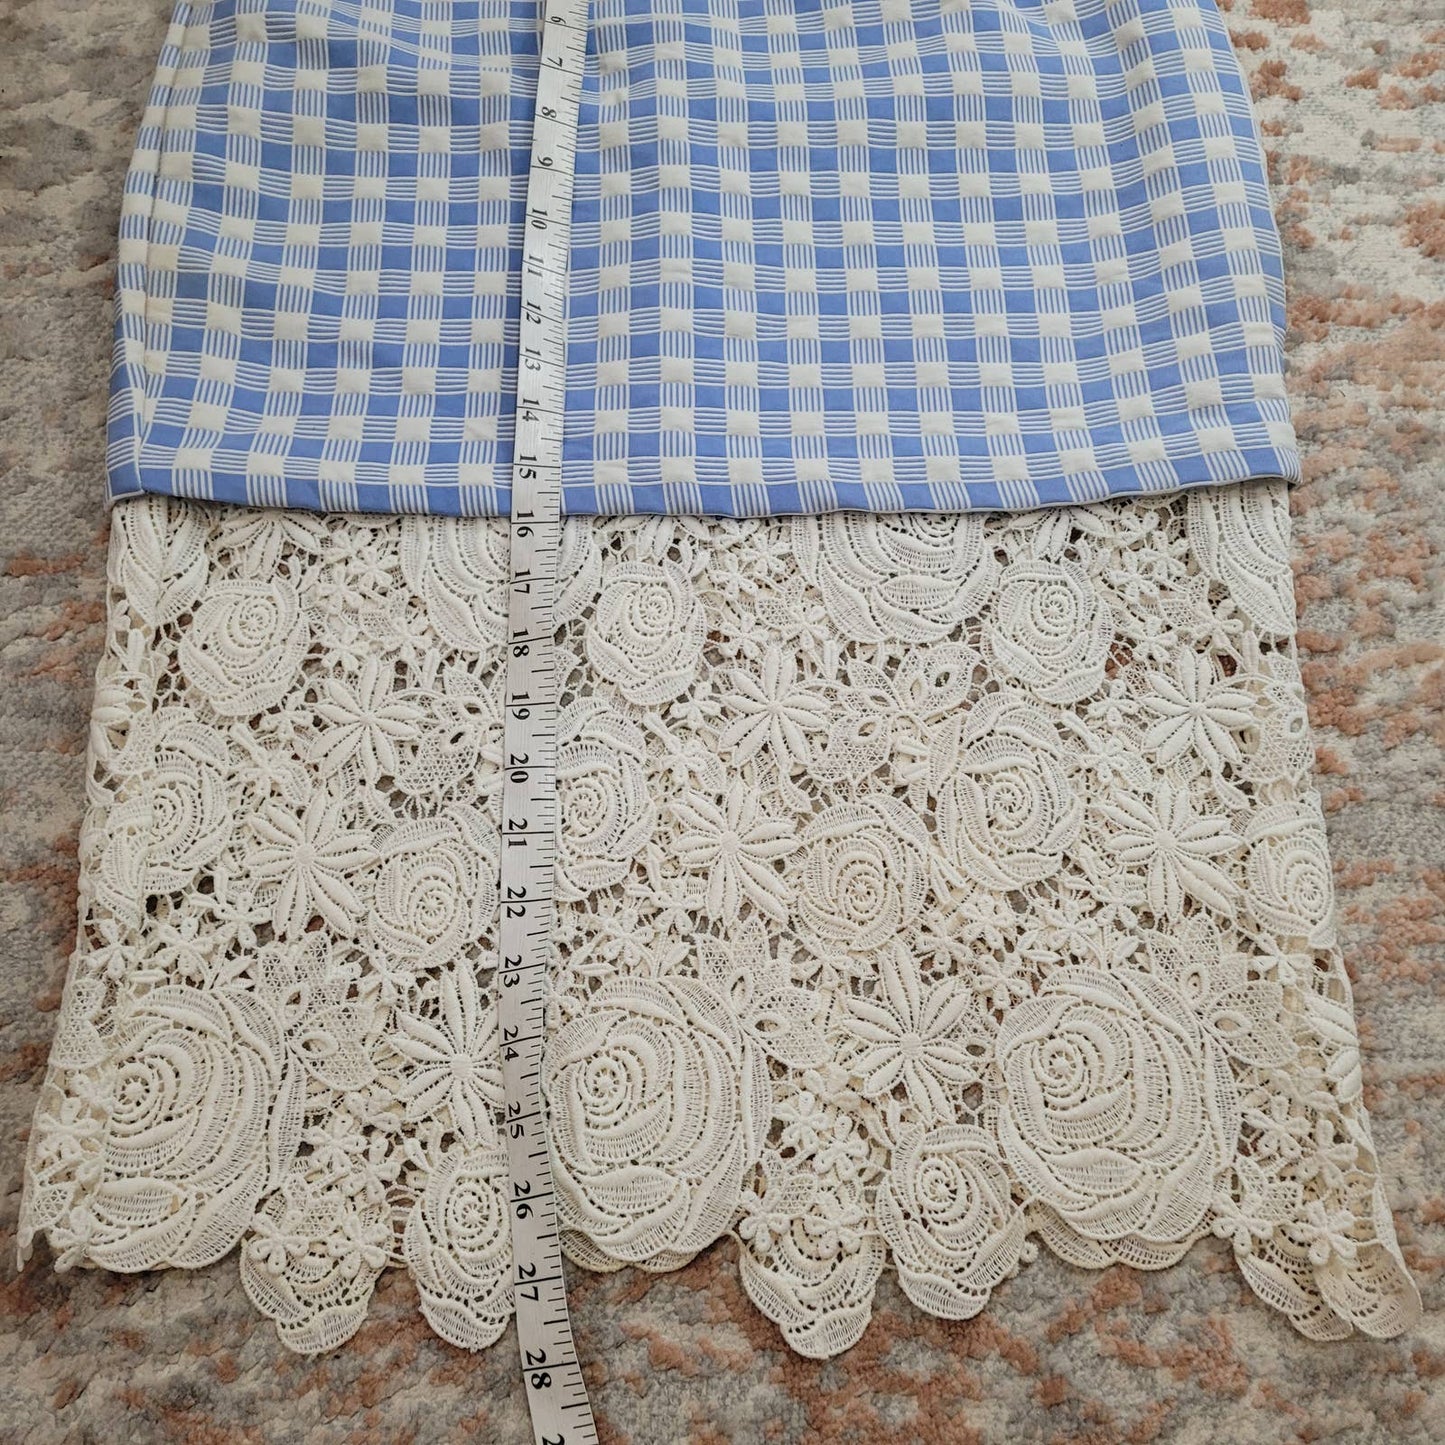 Endless Rose Blue Plaid Skirt with Crocheted Lace Hem - Size Large